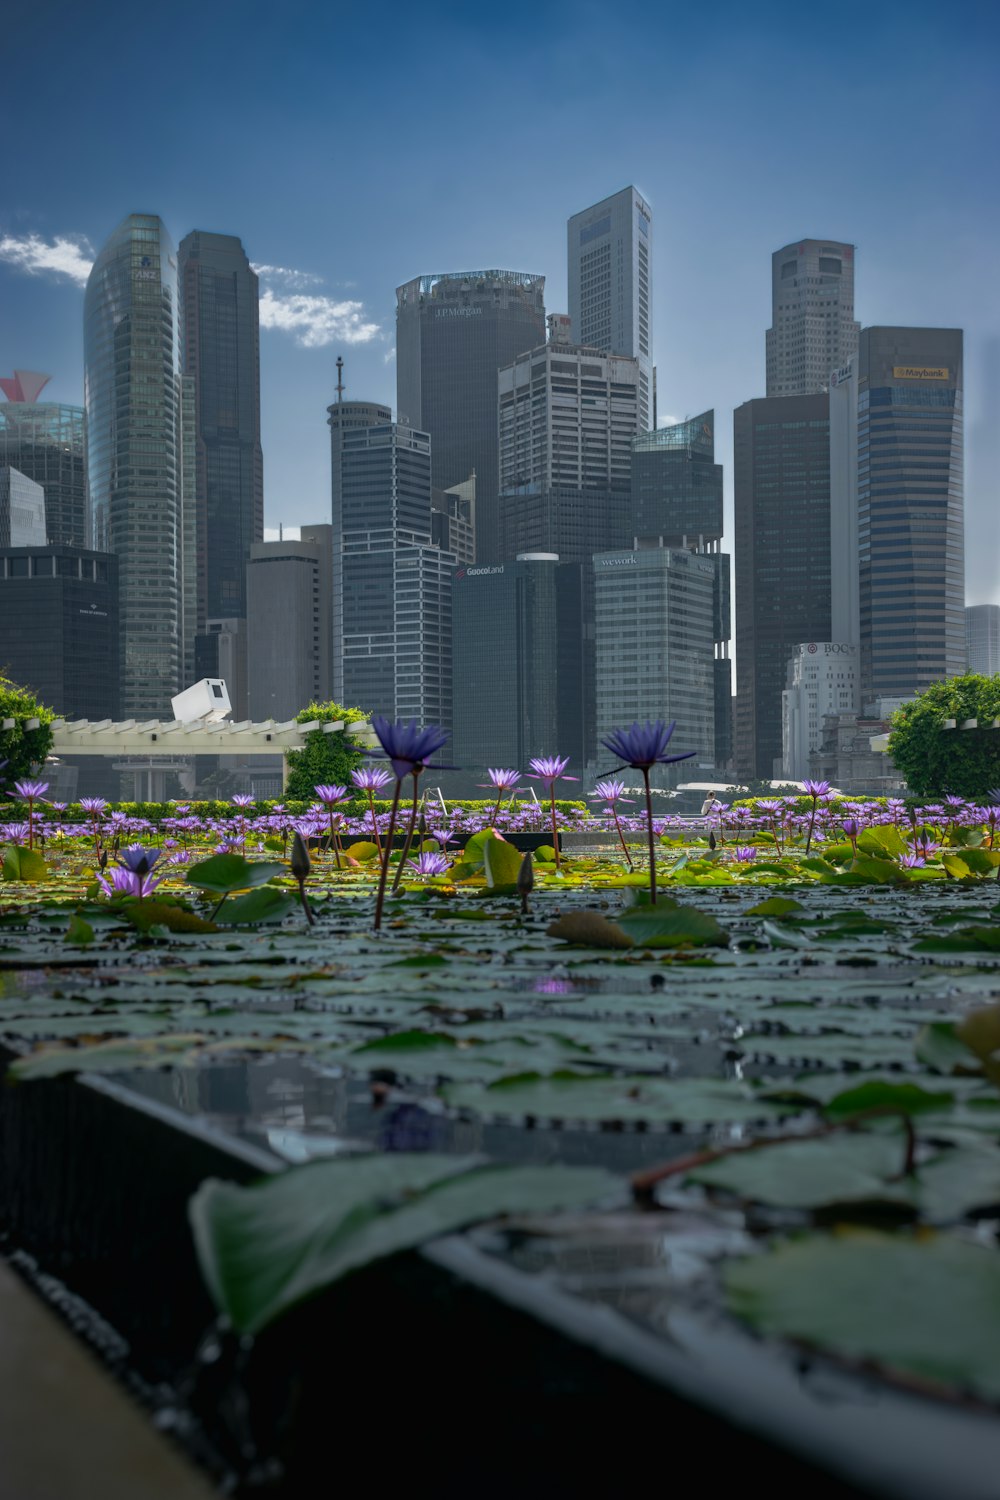 a city skyline is seen in the background with purple flowers in the foreground